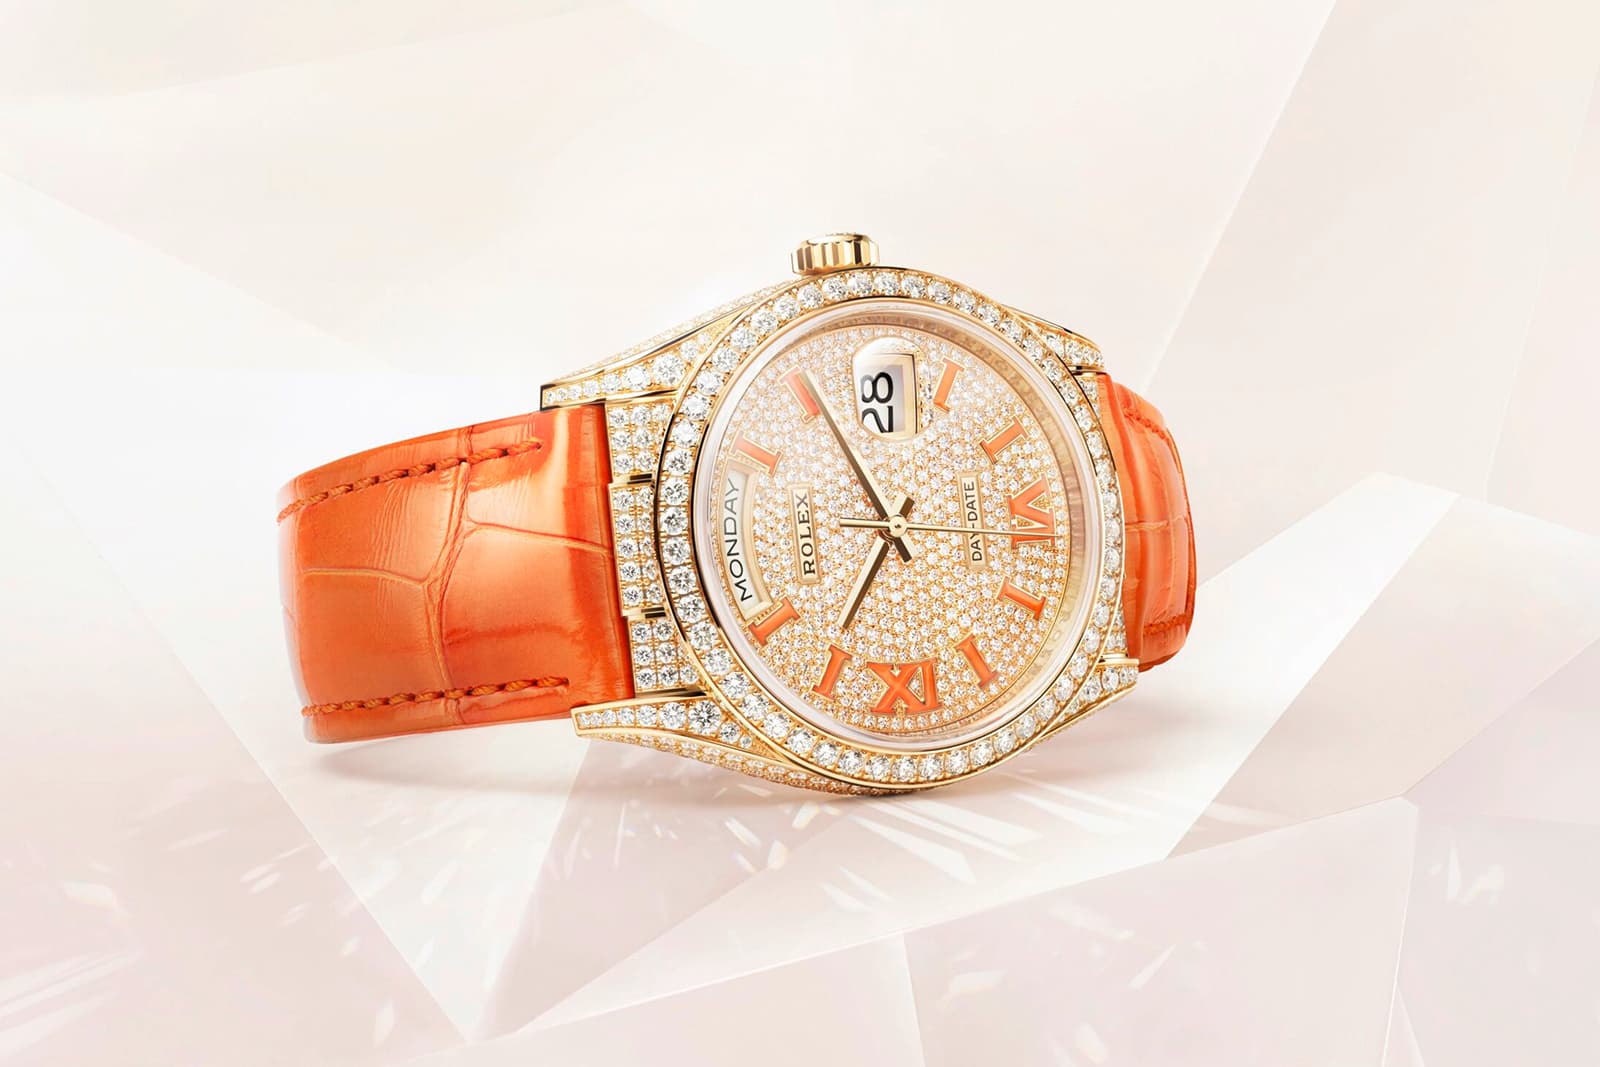 New pavé diamond watches with sparkling personalities